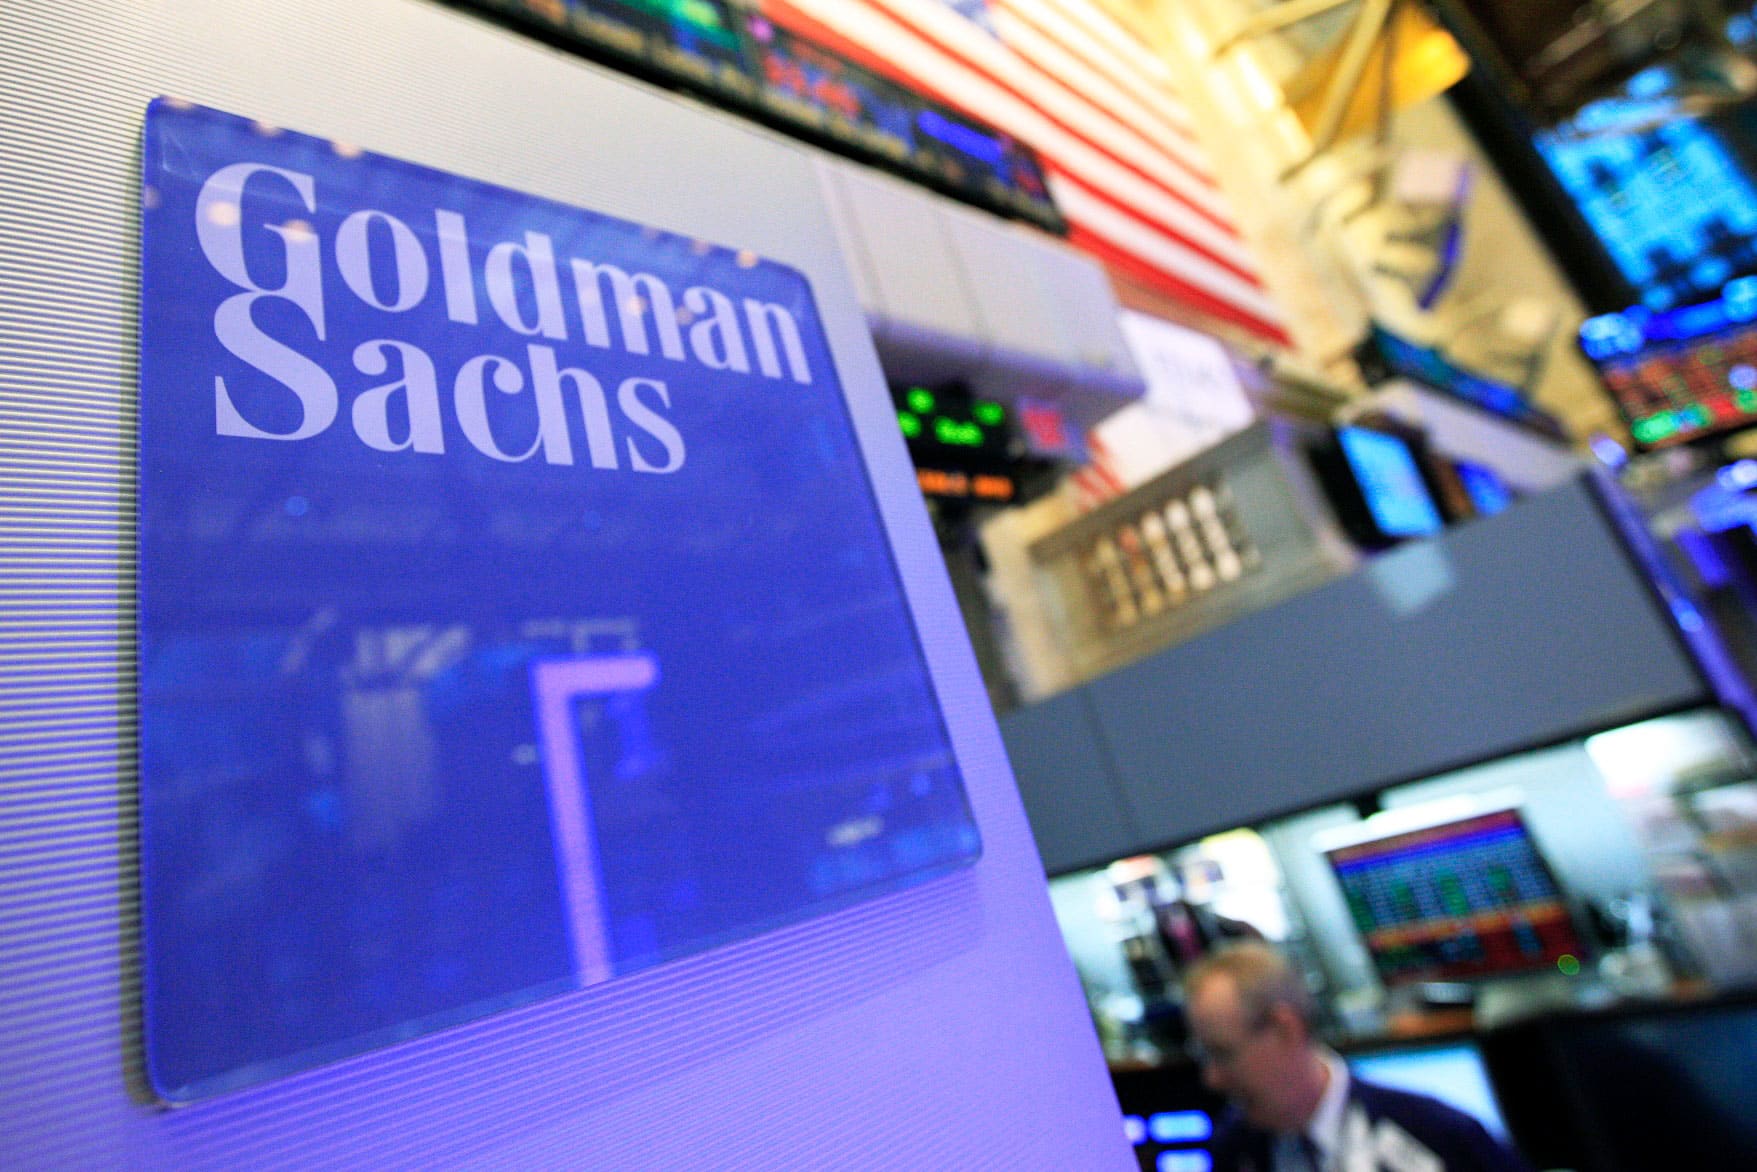 Goldman Sachs crushes analysts' estimates on stronger-than-expected stock trading, investment banking